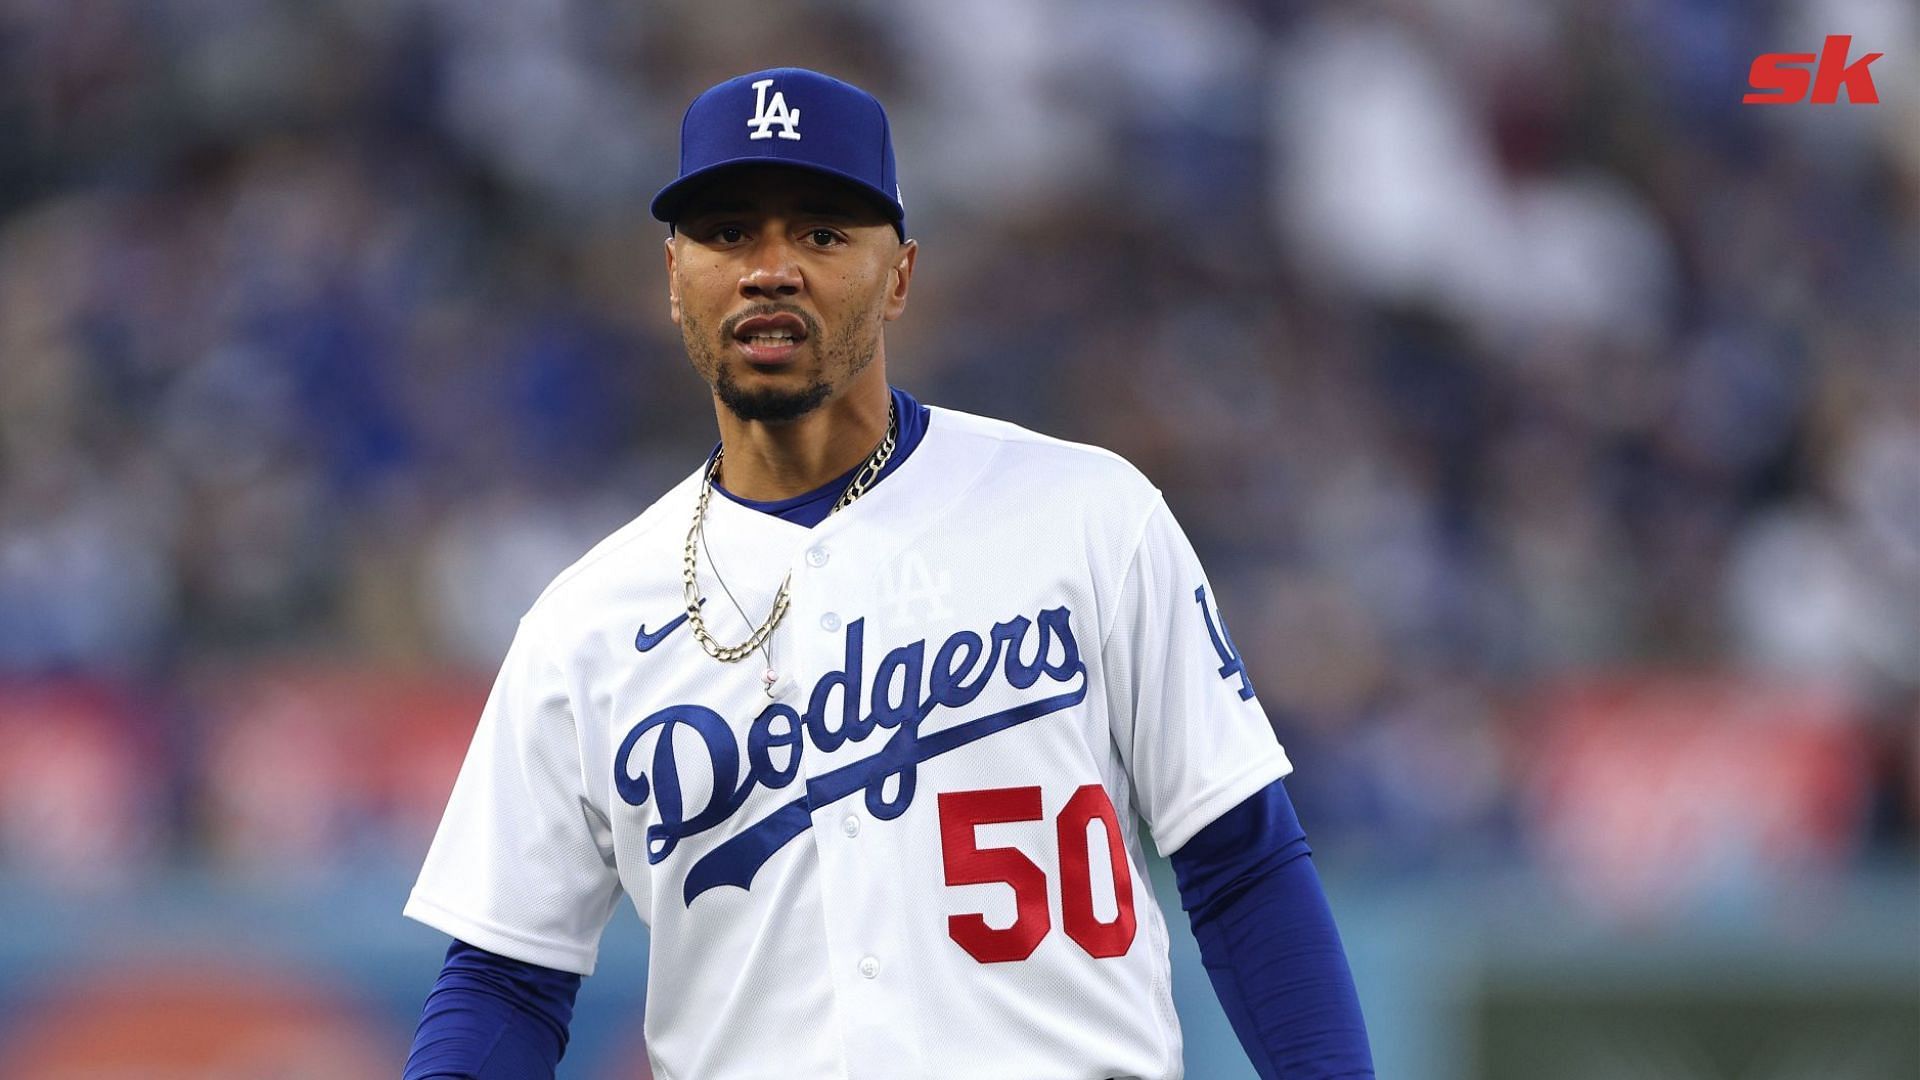 Dodgers star Mookie Betts' brutally honest take on facing Padres